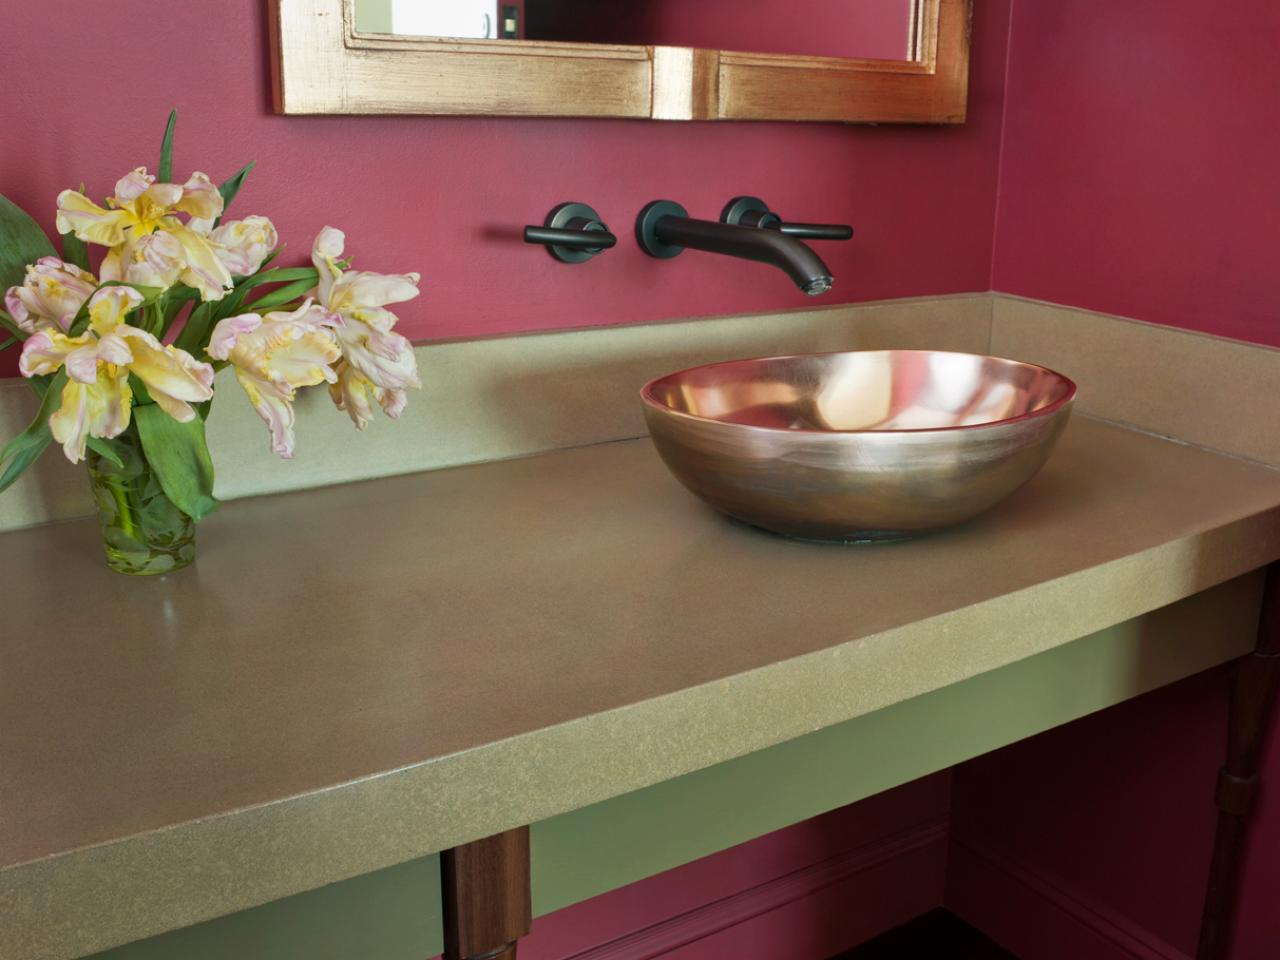 What are some good materials for bathroom sinks and countertops?